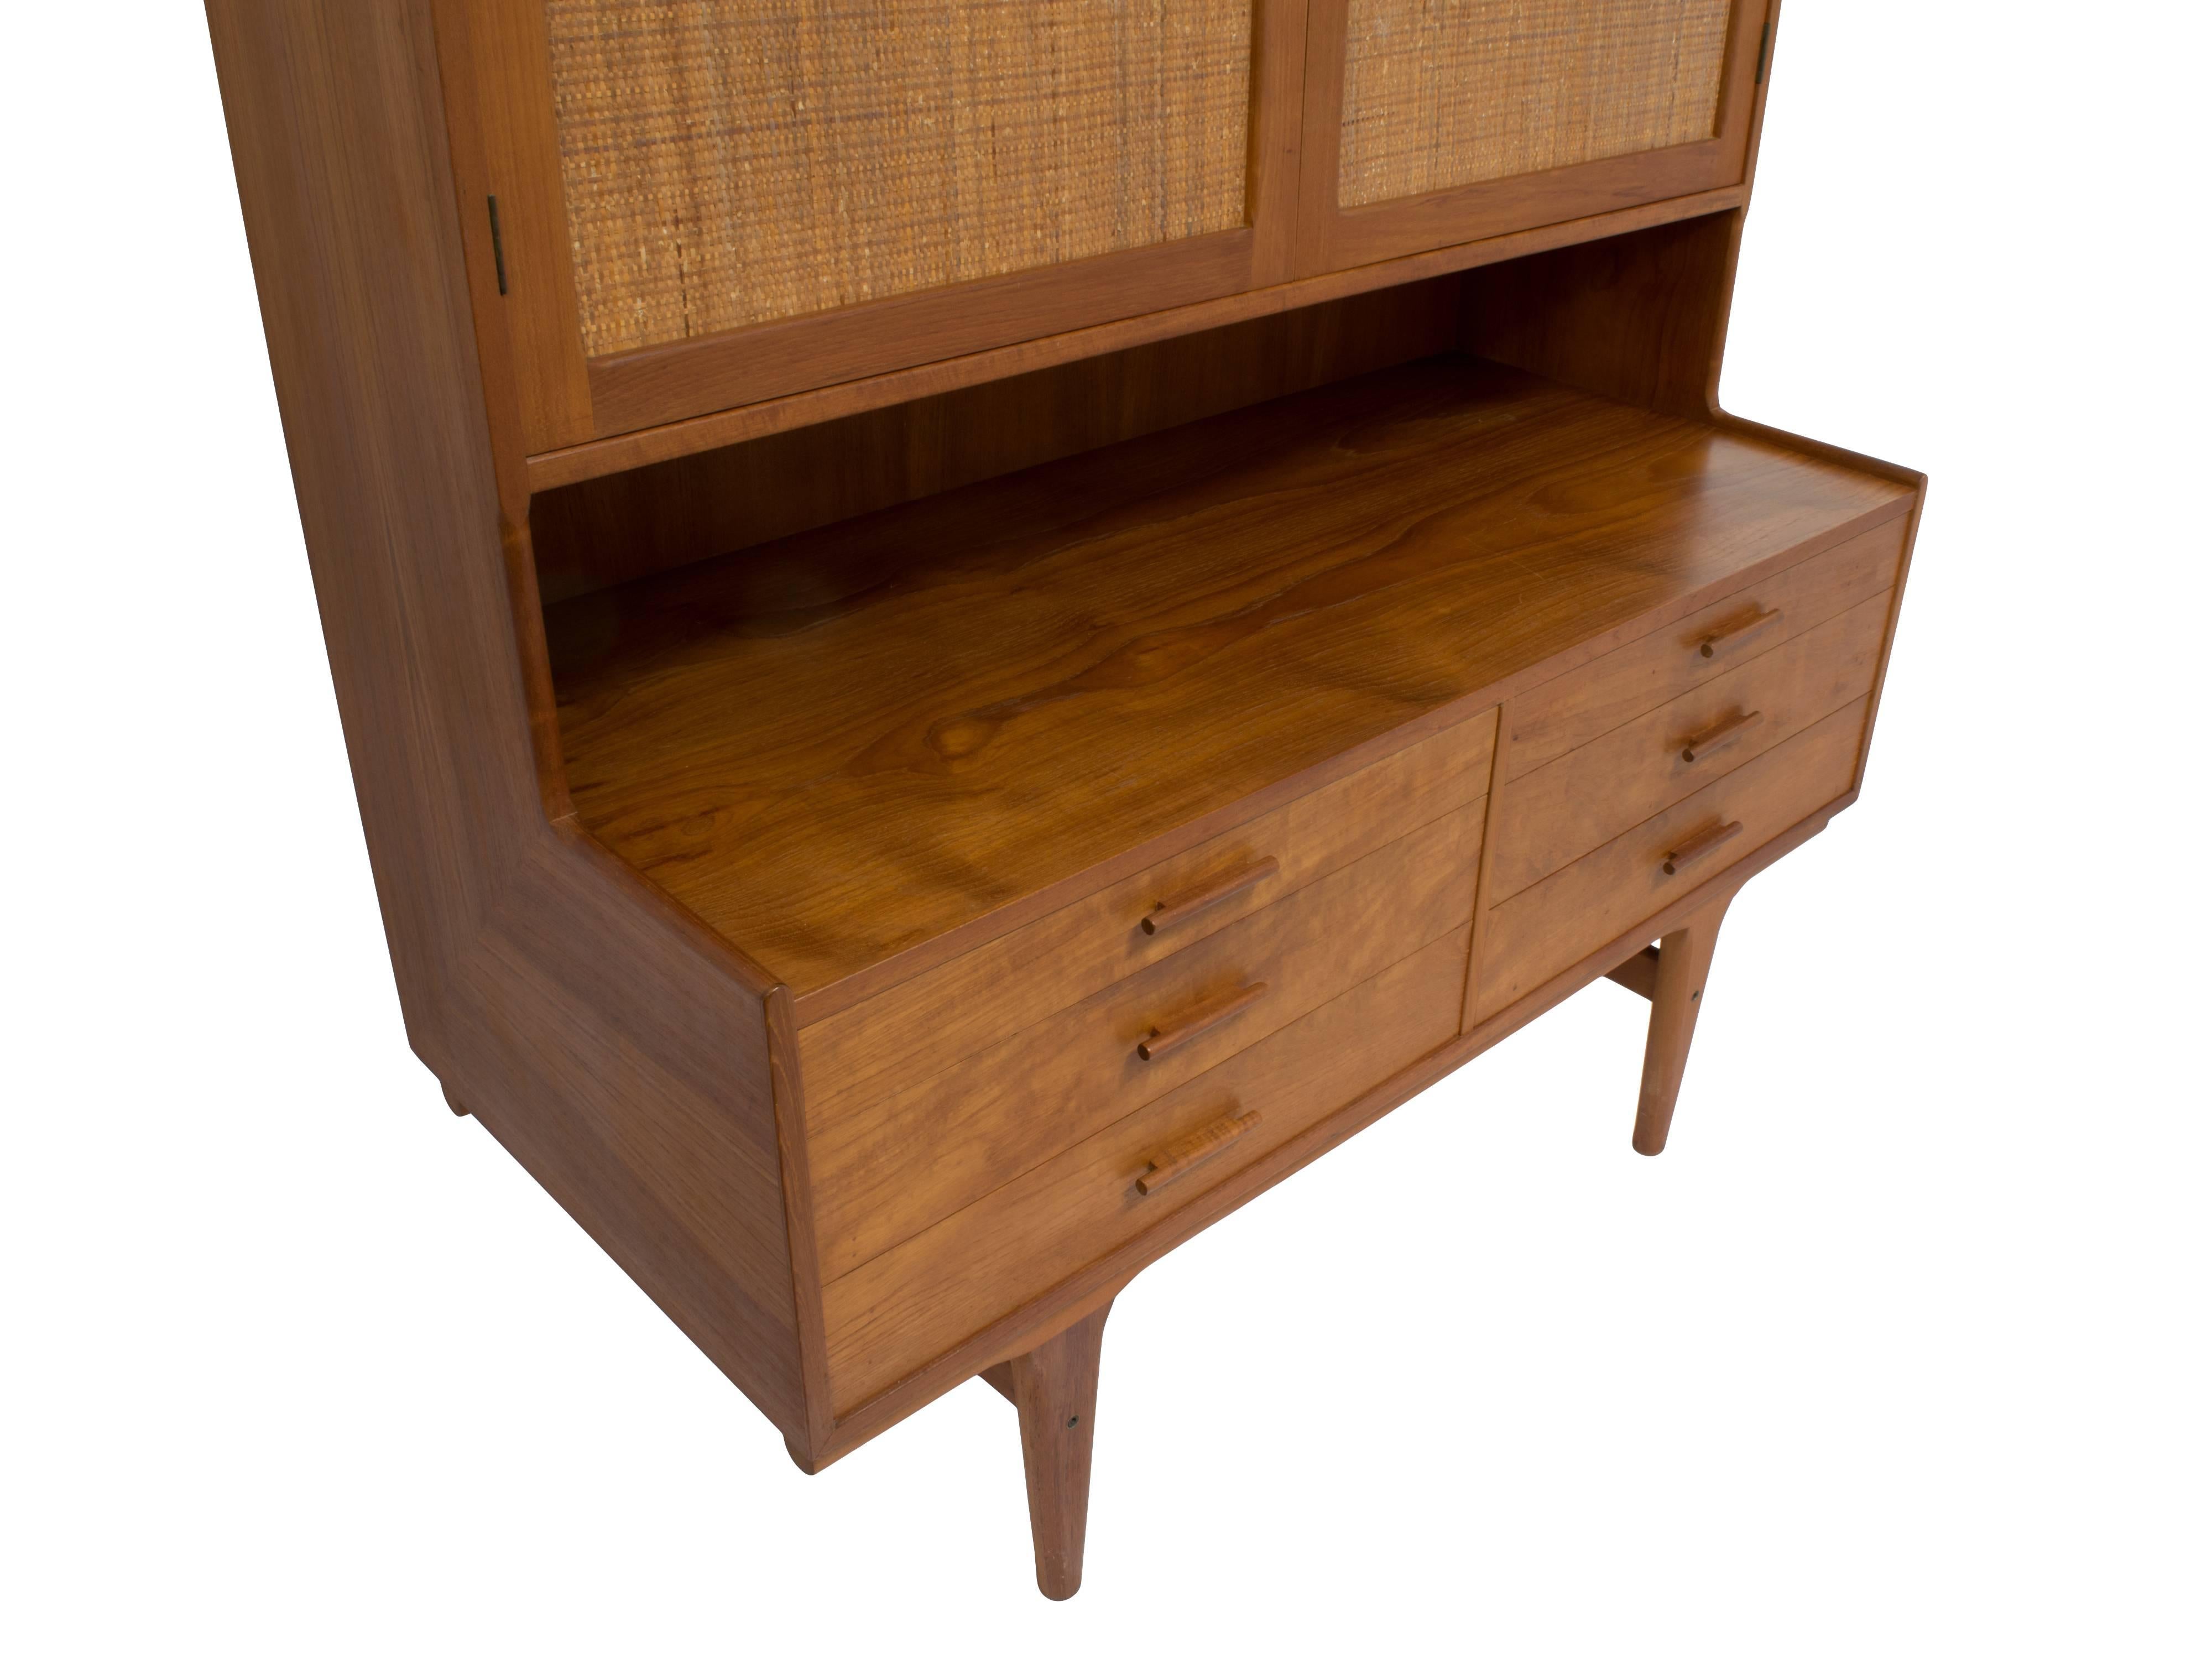 This mid-century Danish cabinet is extraordinary, a tall and gorgeous example of the quality and precision of Danish cabinetmakers in the 1950s, just an exquisite example of authentic Danish craftsmanship. Although it is unmarked by its maker (“Made